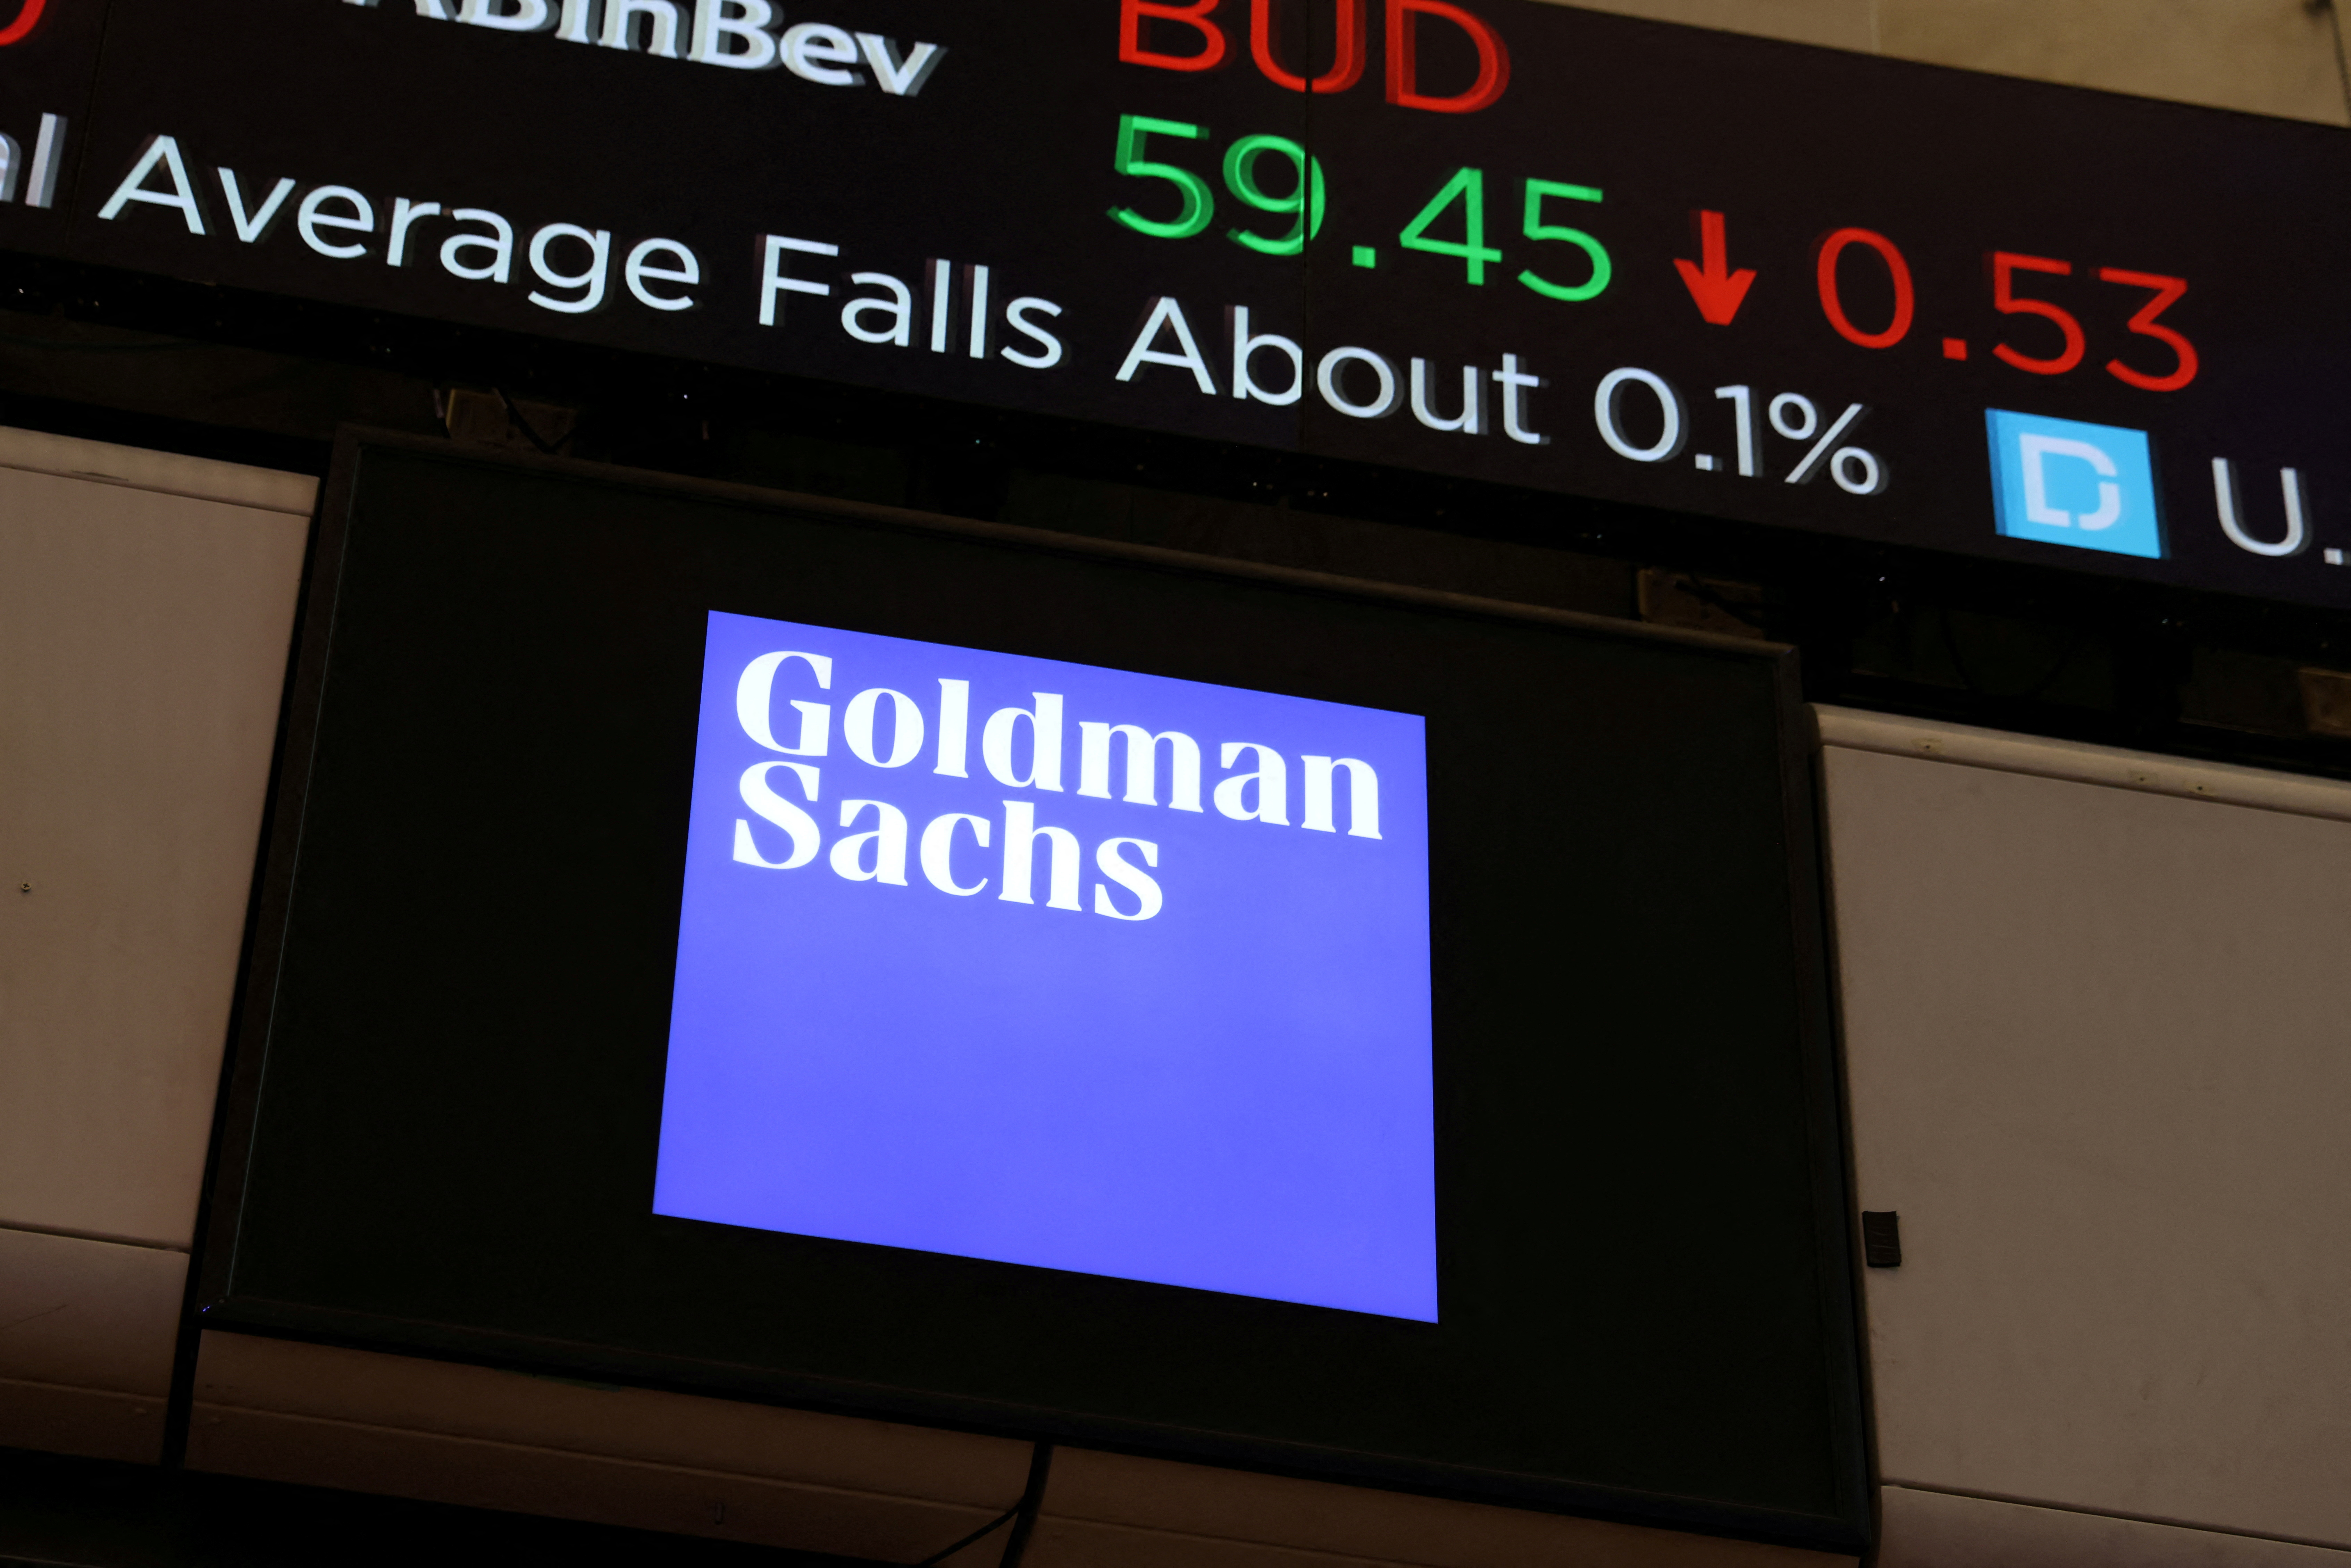 The Goldman Sachs logo is seen on the trading floor at the New York Stock Exchange (NYSE) in New York City.